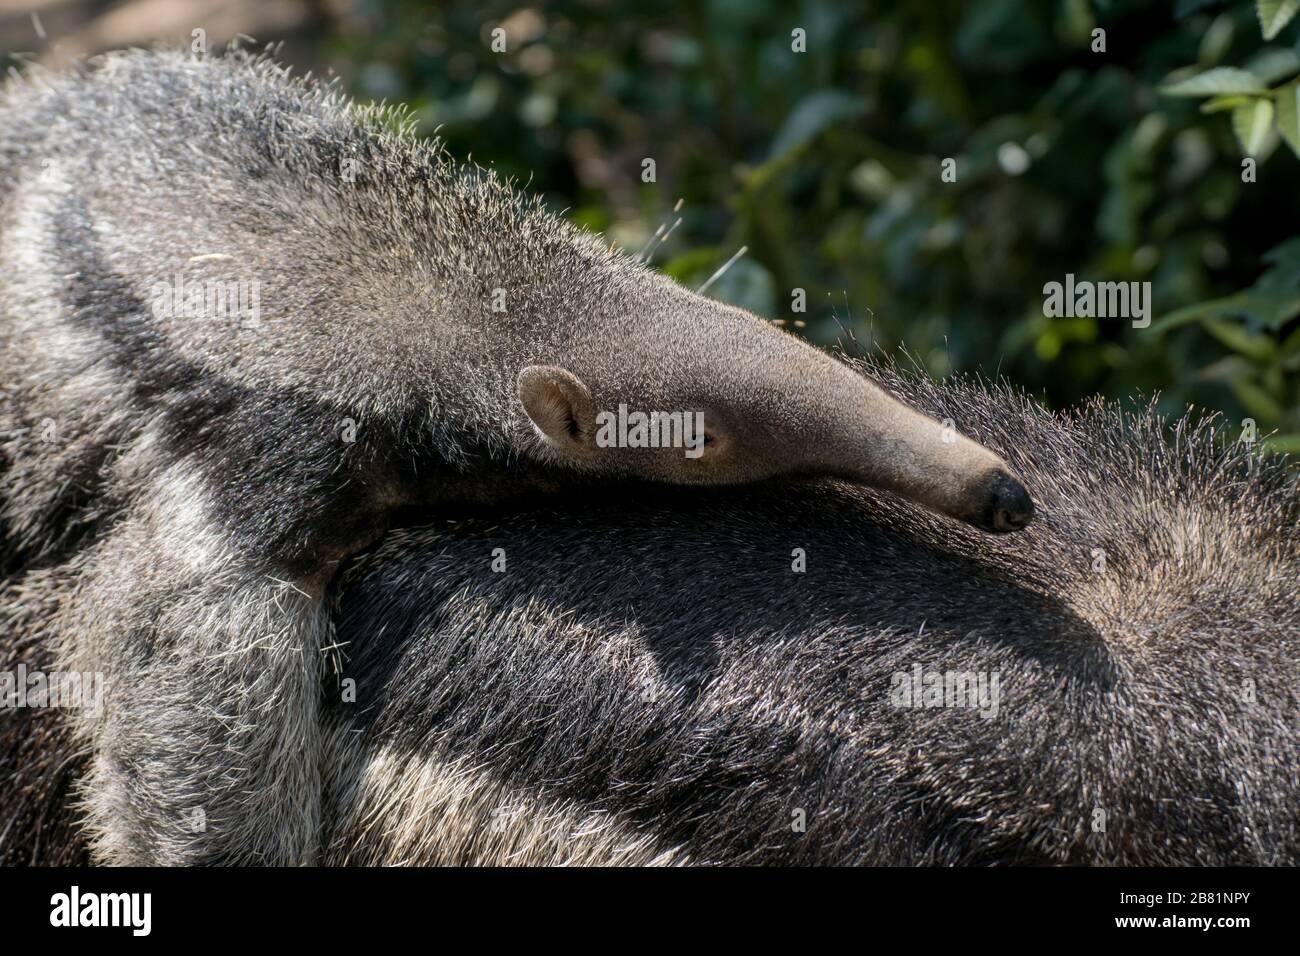 Face portrait of a young baby giant anteater sleeping under the sunlight Stock Photo